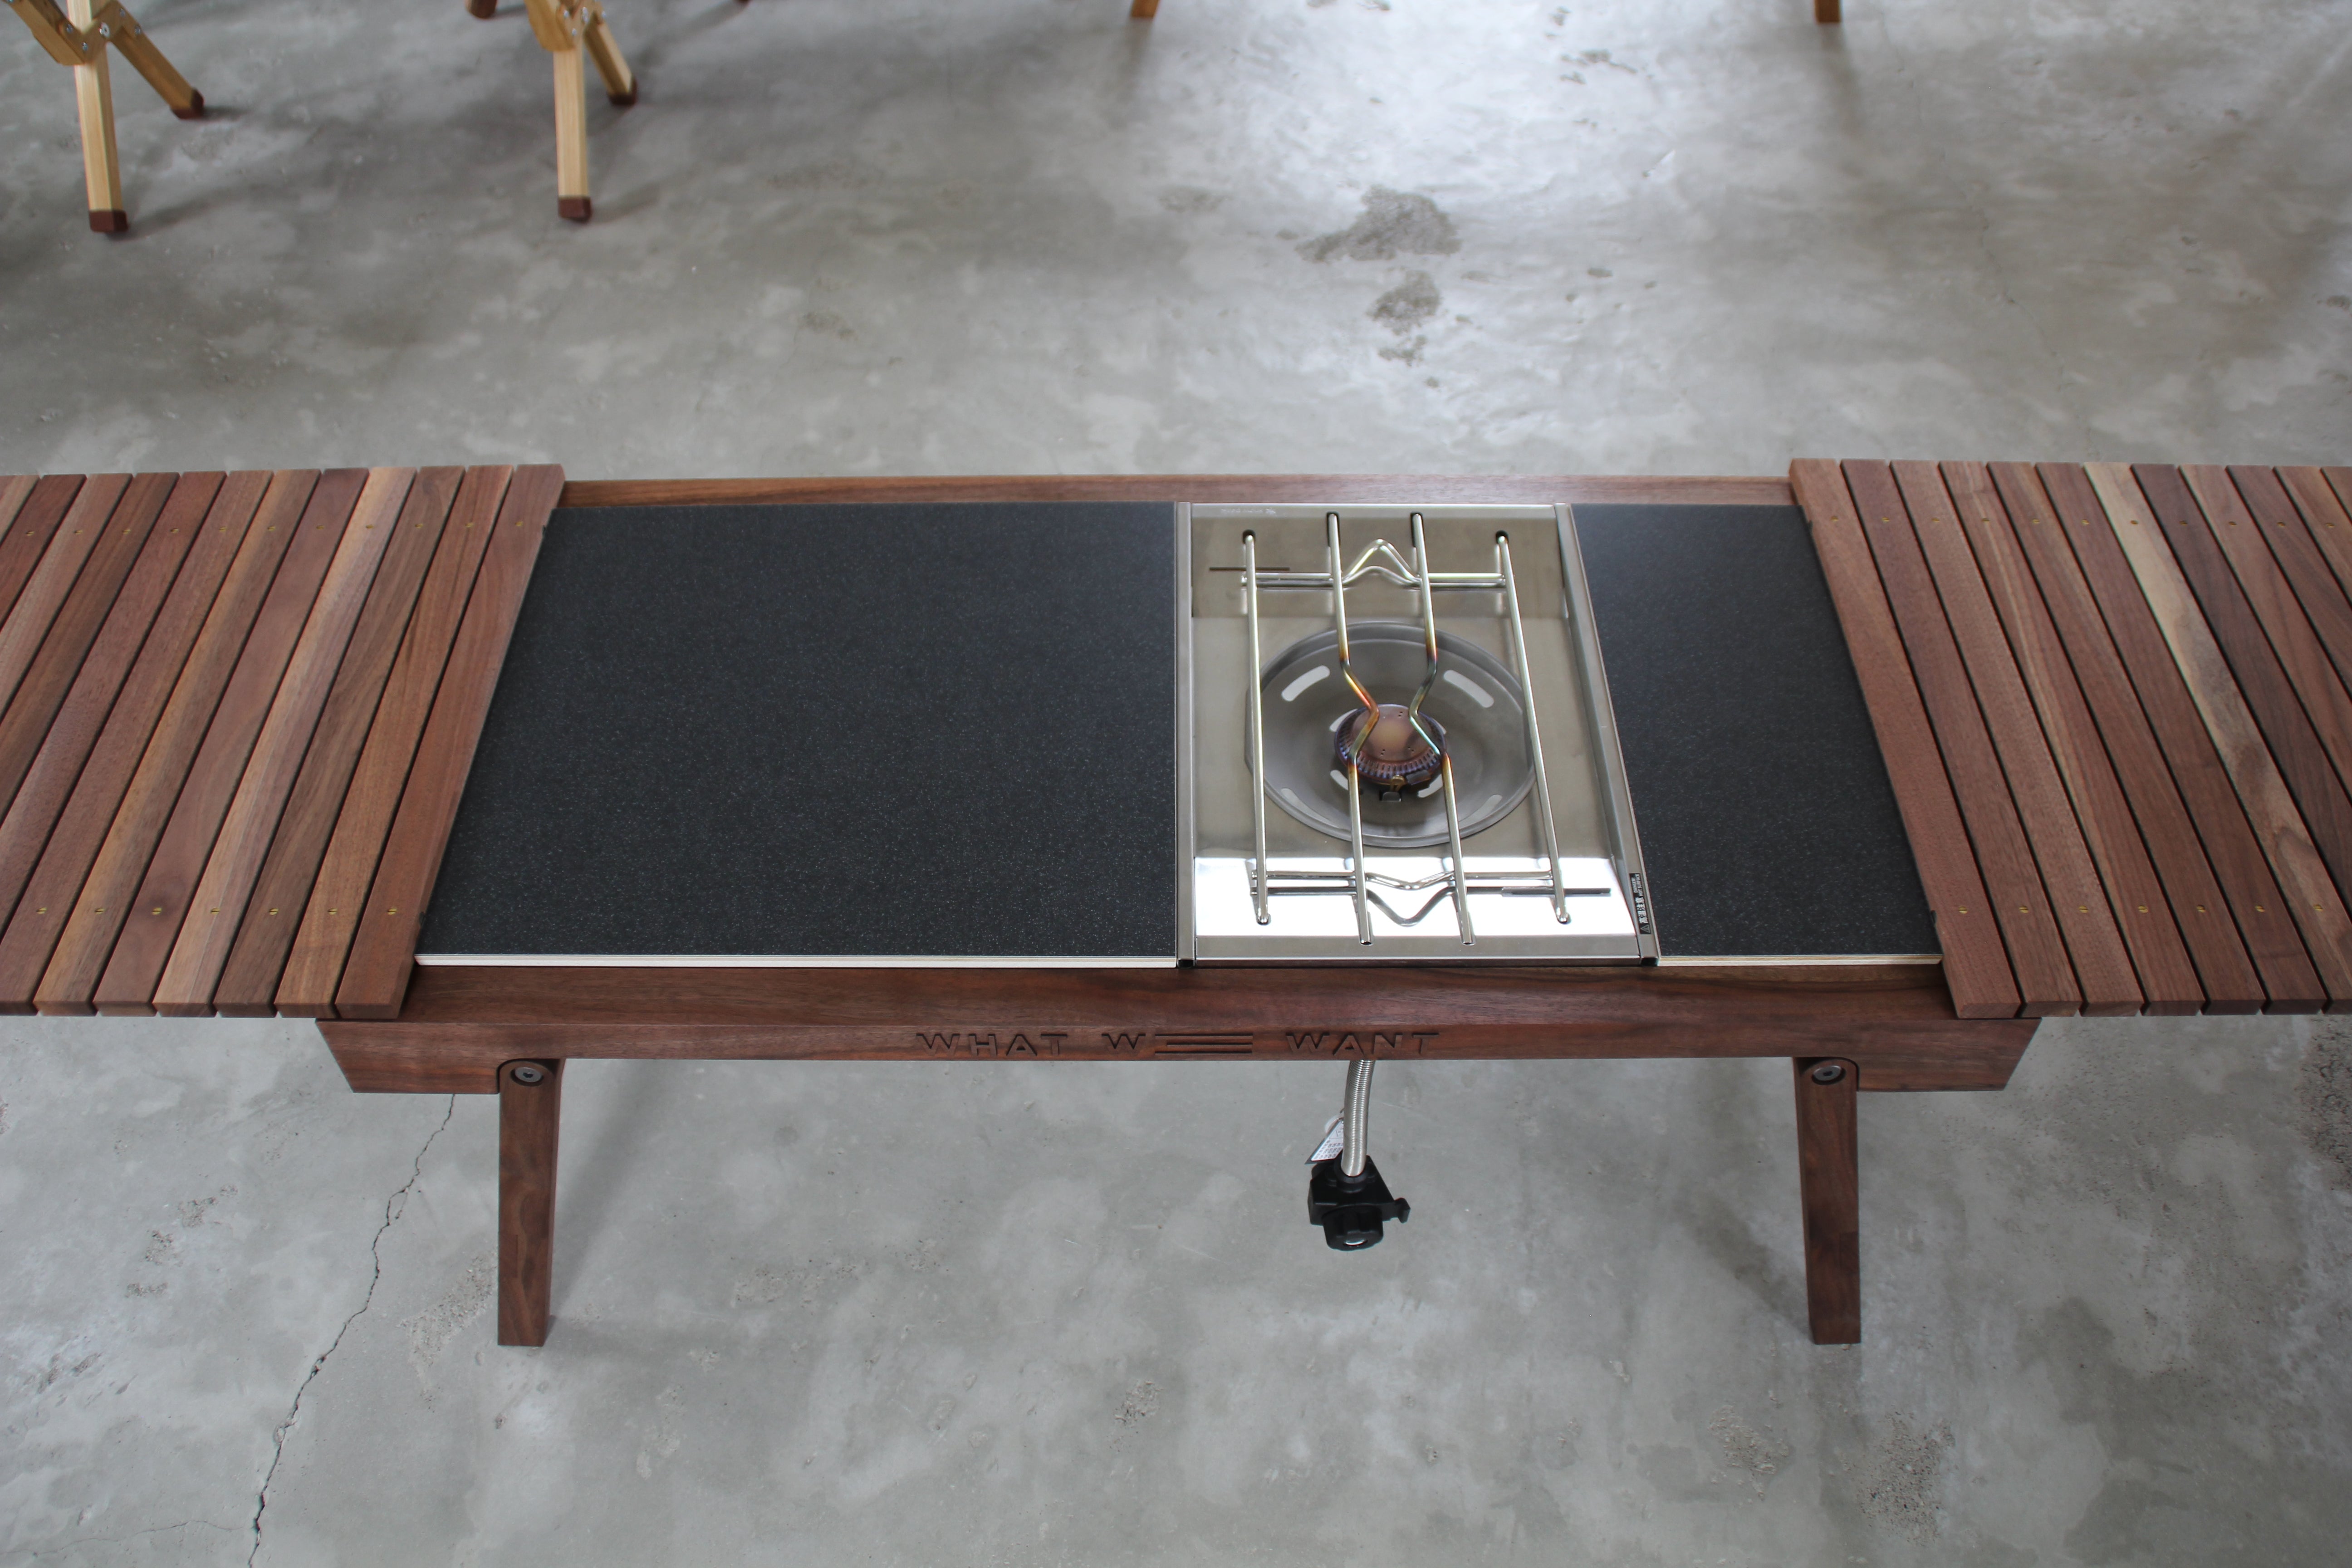 WHAT WE WANT ナラ  WWW_EXTENSIONTABLE OAK